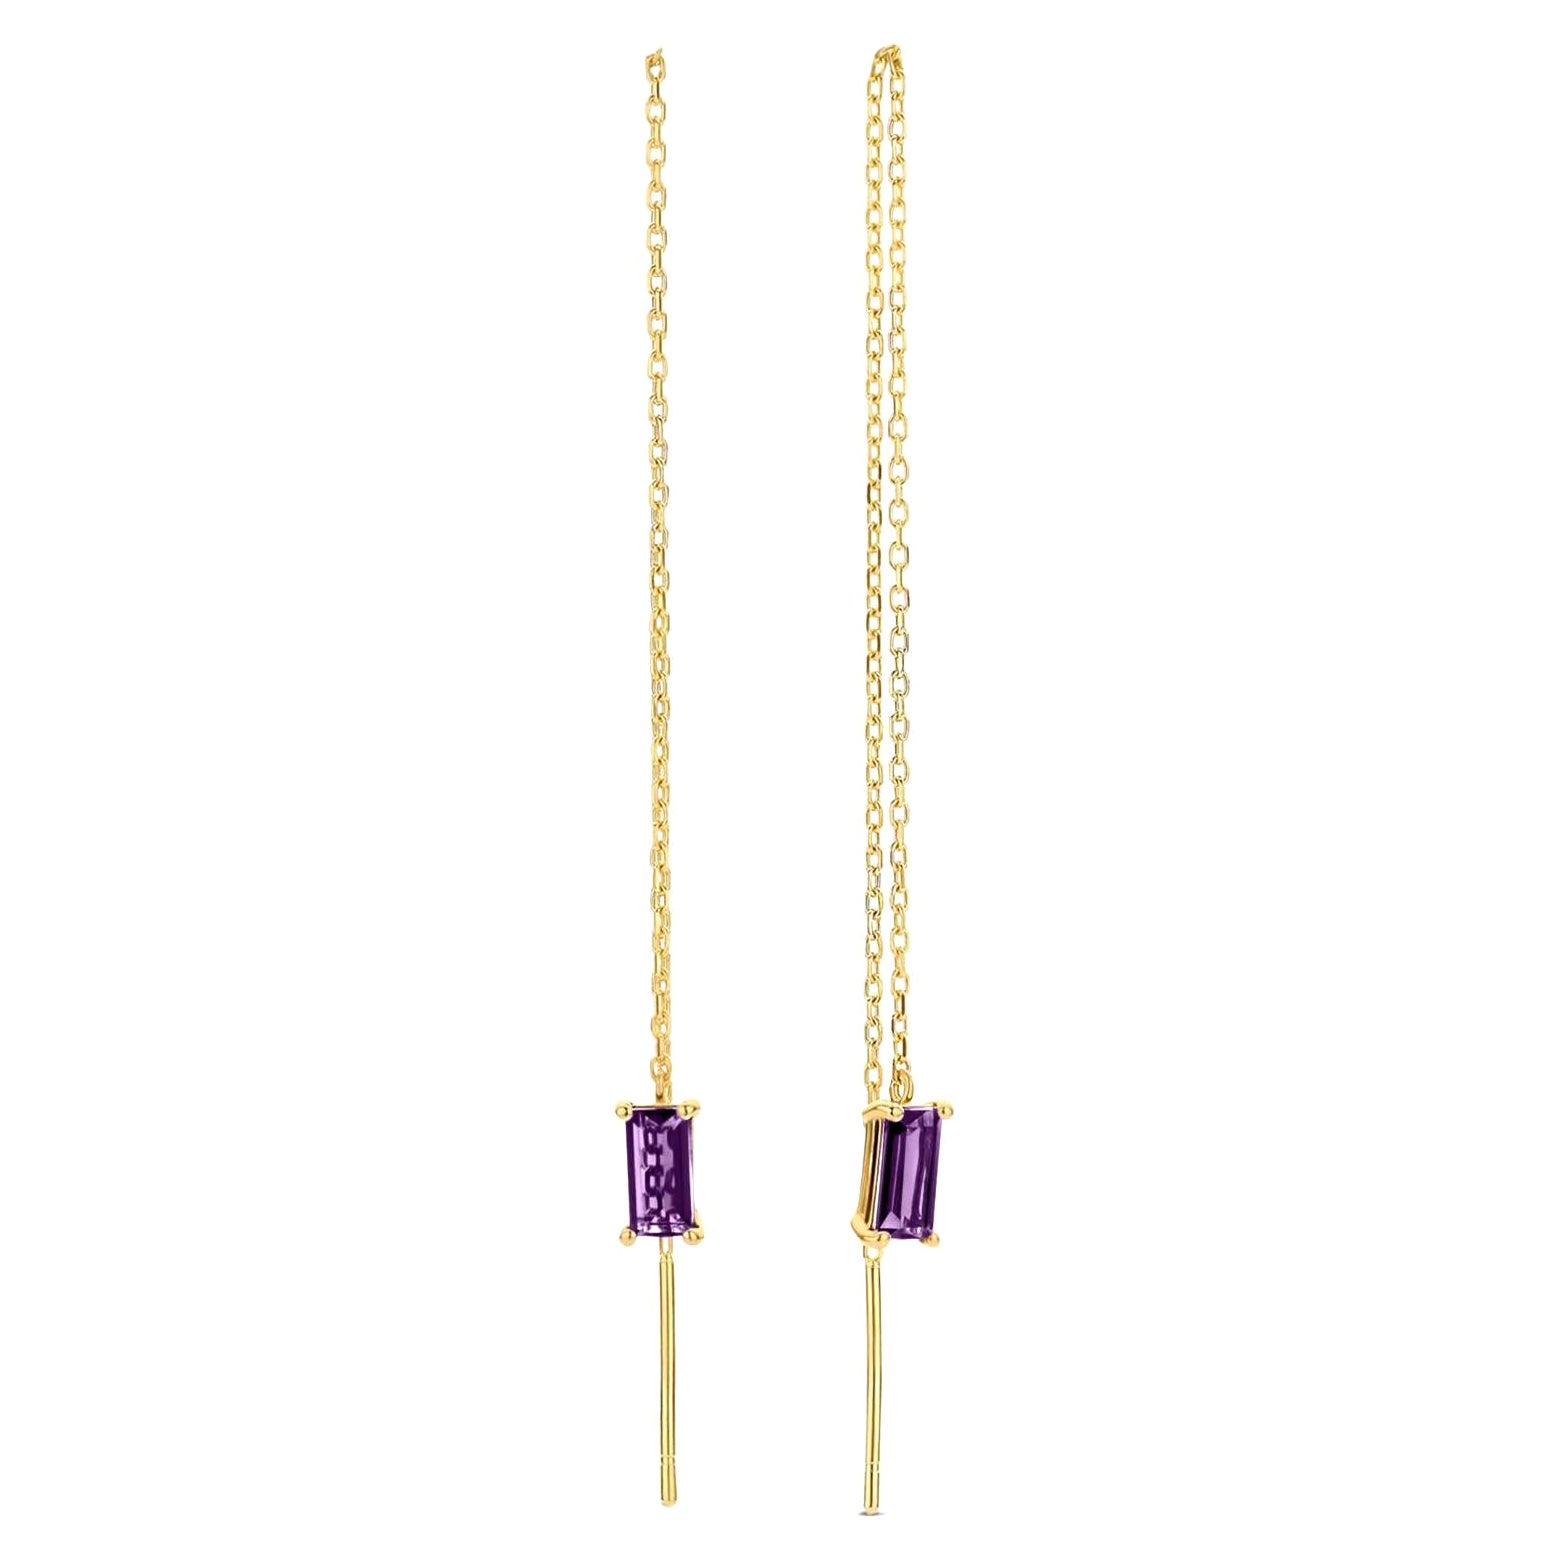 14k Solid Gold Drop Earrings with Amethysts, Chain Gold Earrings For Sale